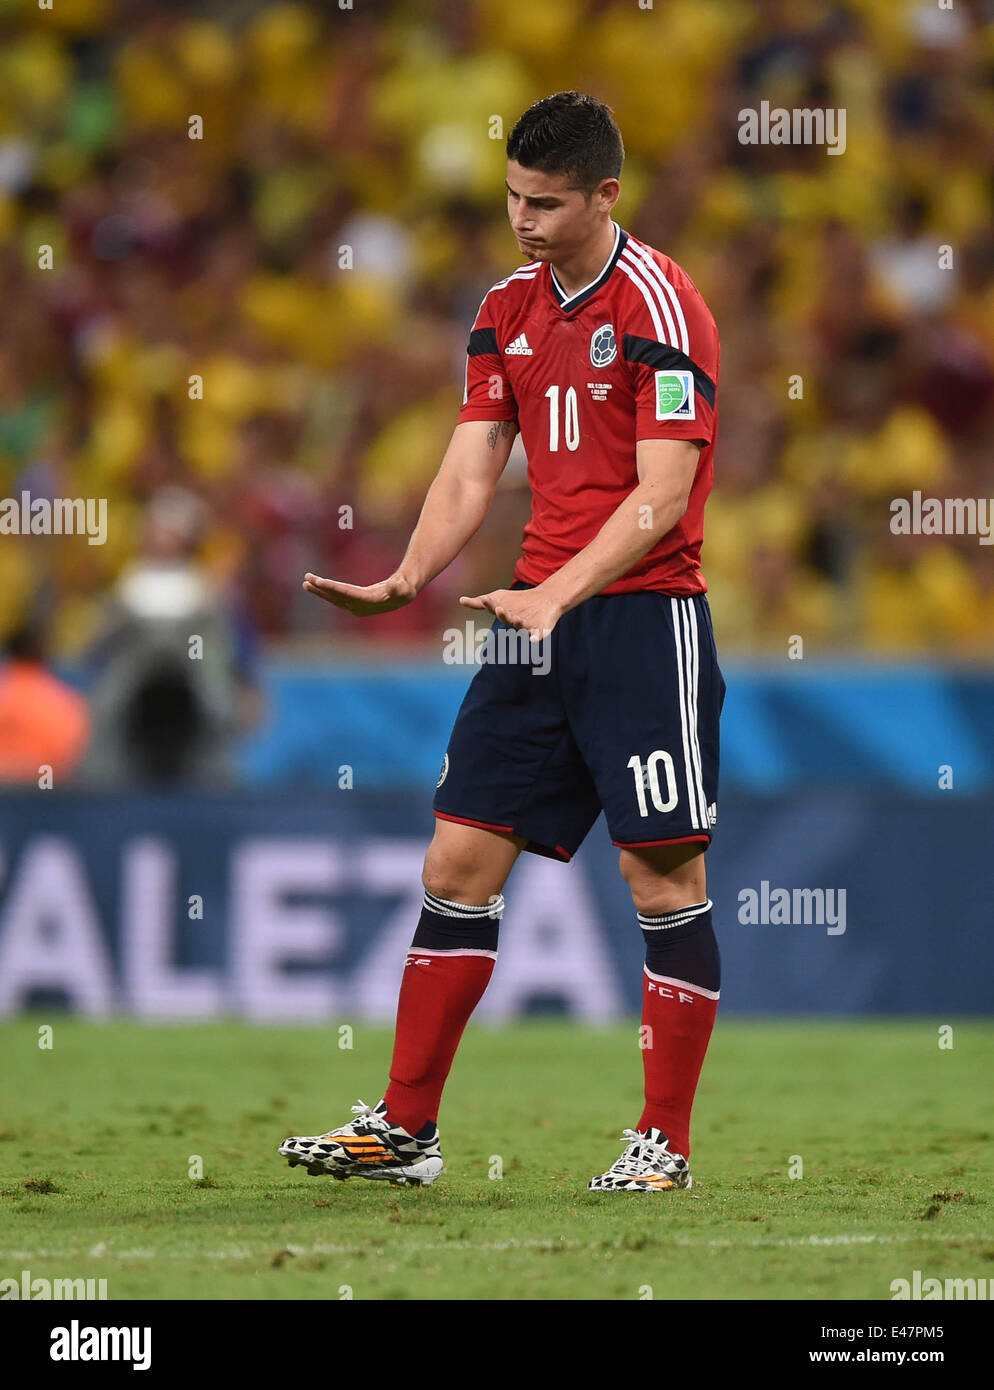 Fortaleza, Brazil. 04th July, 2014. James Rodriguez of Colombia reacts during the FIFA World Cup 2014 quarter final match soccer between Brazil and Colombia in Fortaleza, Brazil, 04 July 2014. Photo: Marius Becker/dpa/Alamy Live News Stock Photo